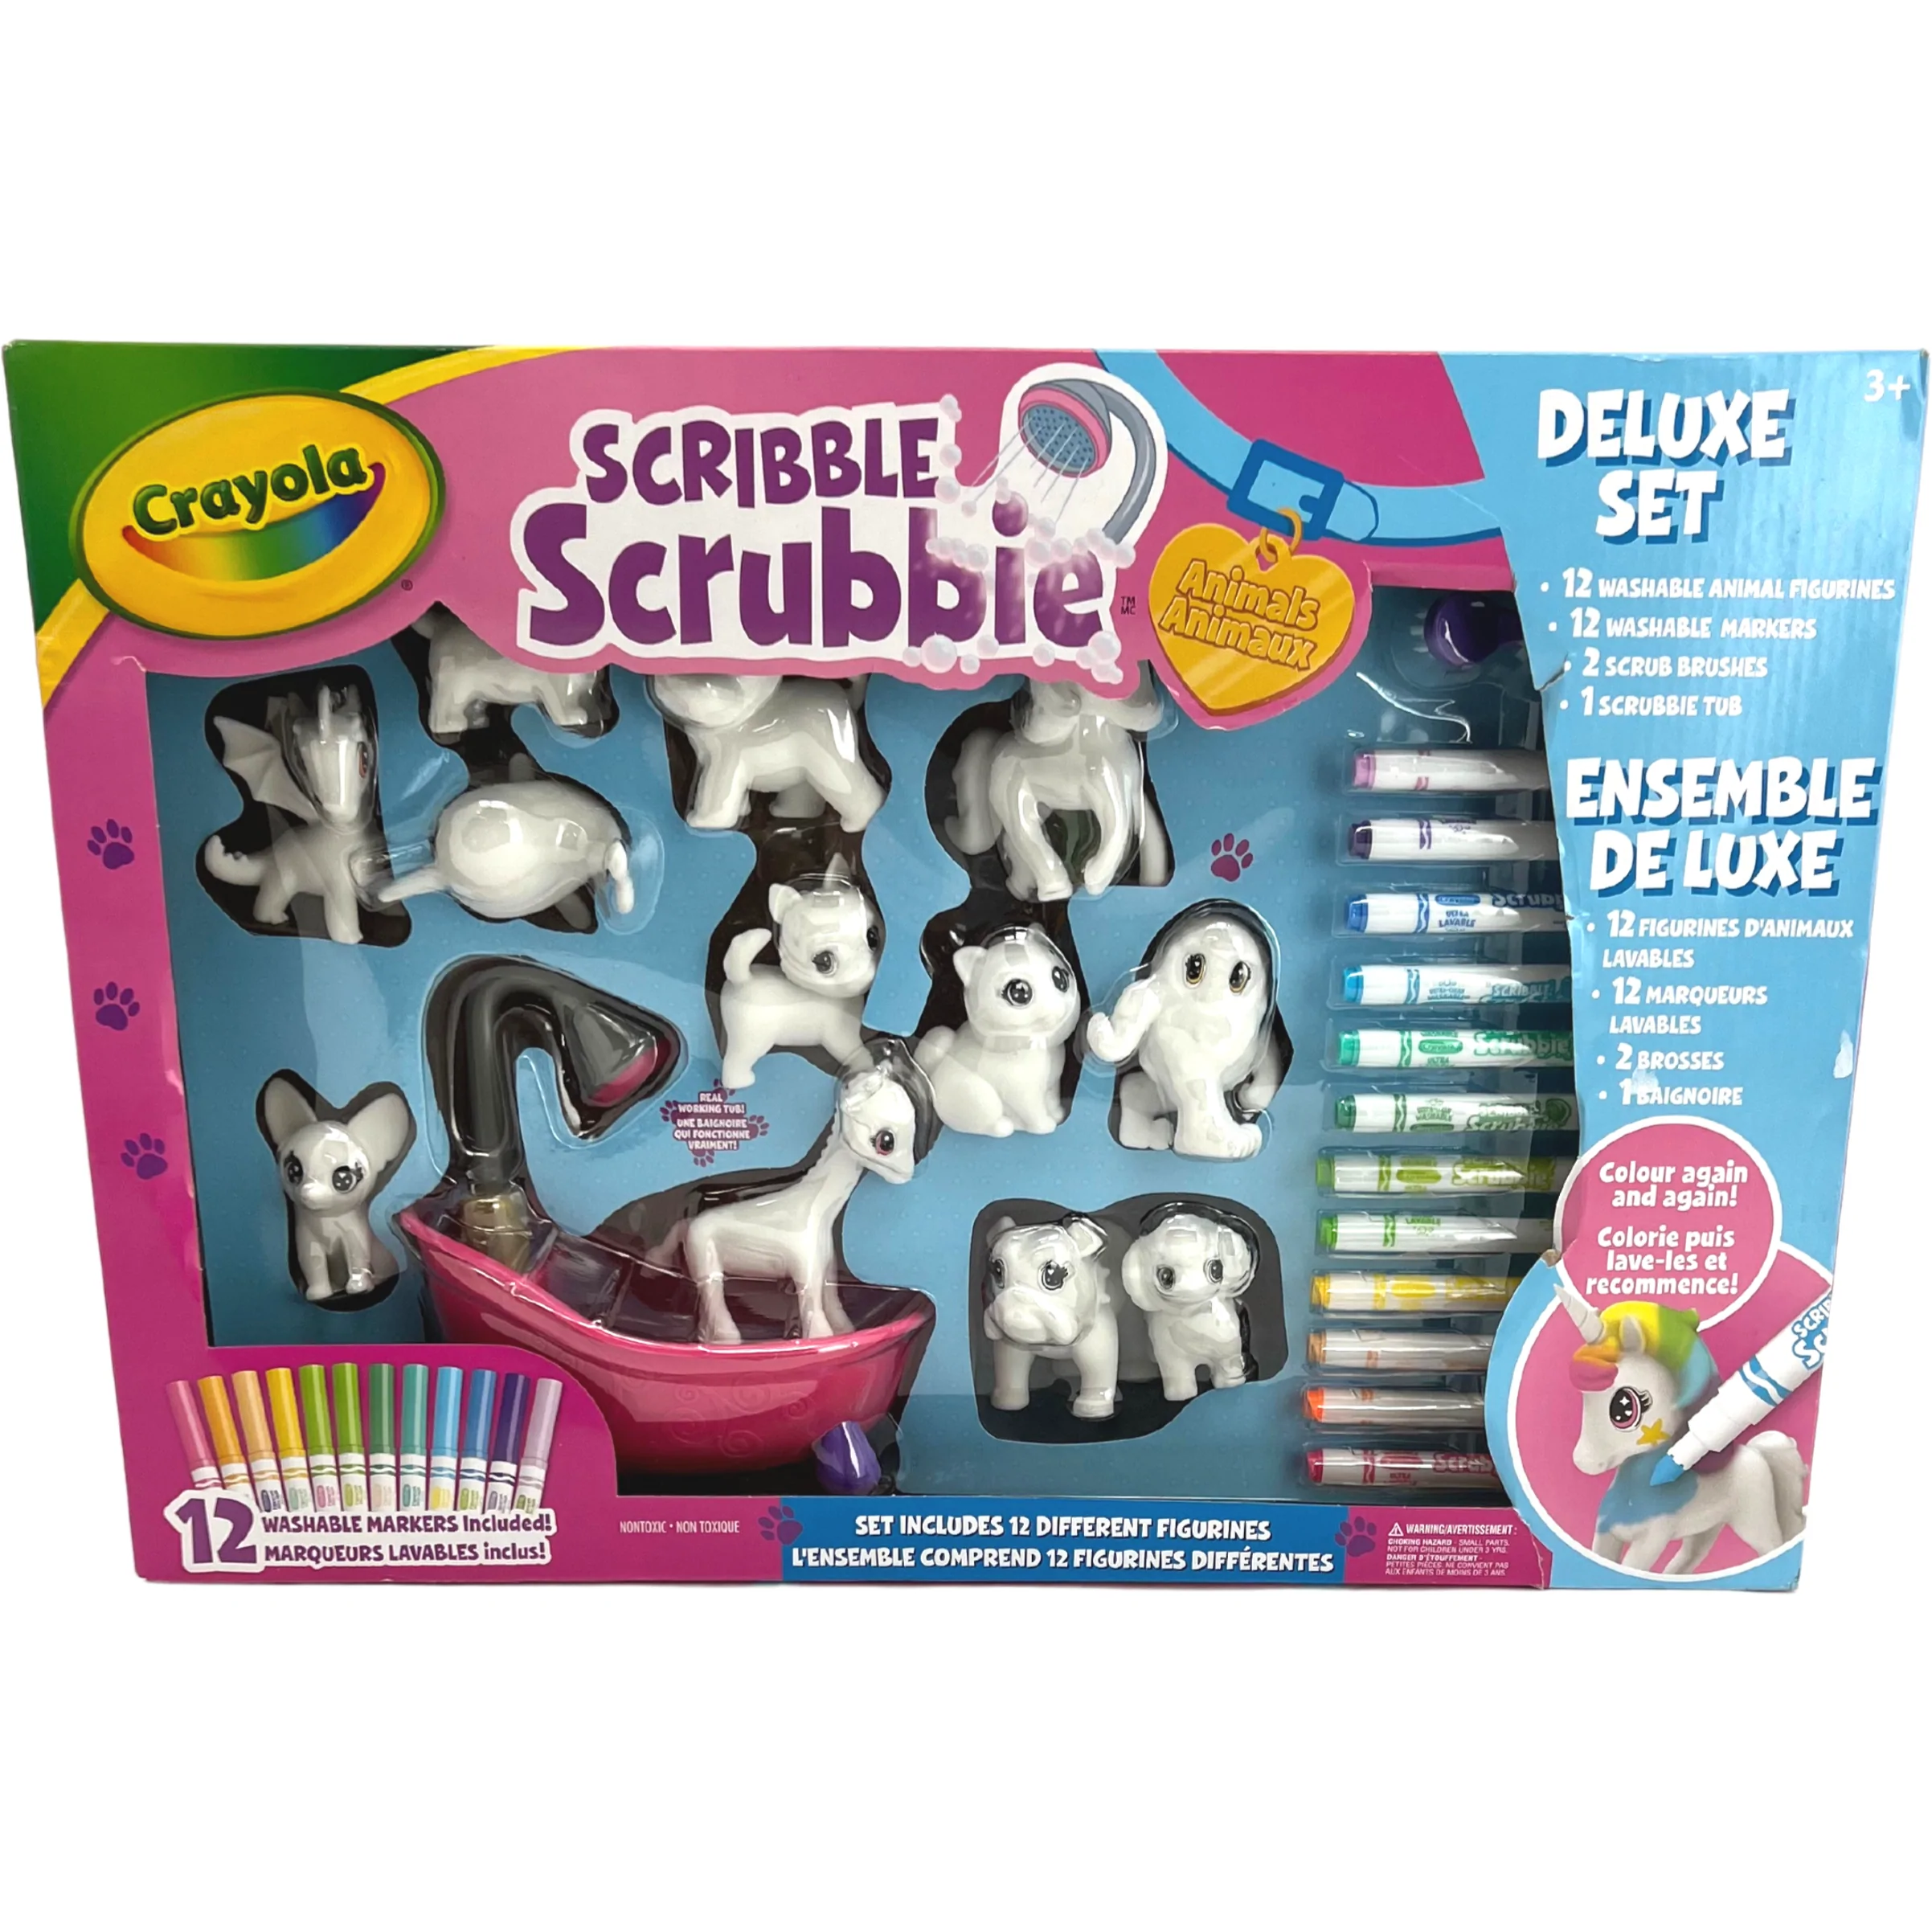 Crayola Scribble Scrubbie Animals / Deluxe Set / Kid's Colouring Toy / Ages 3+**DEALS**